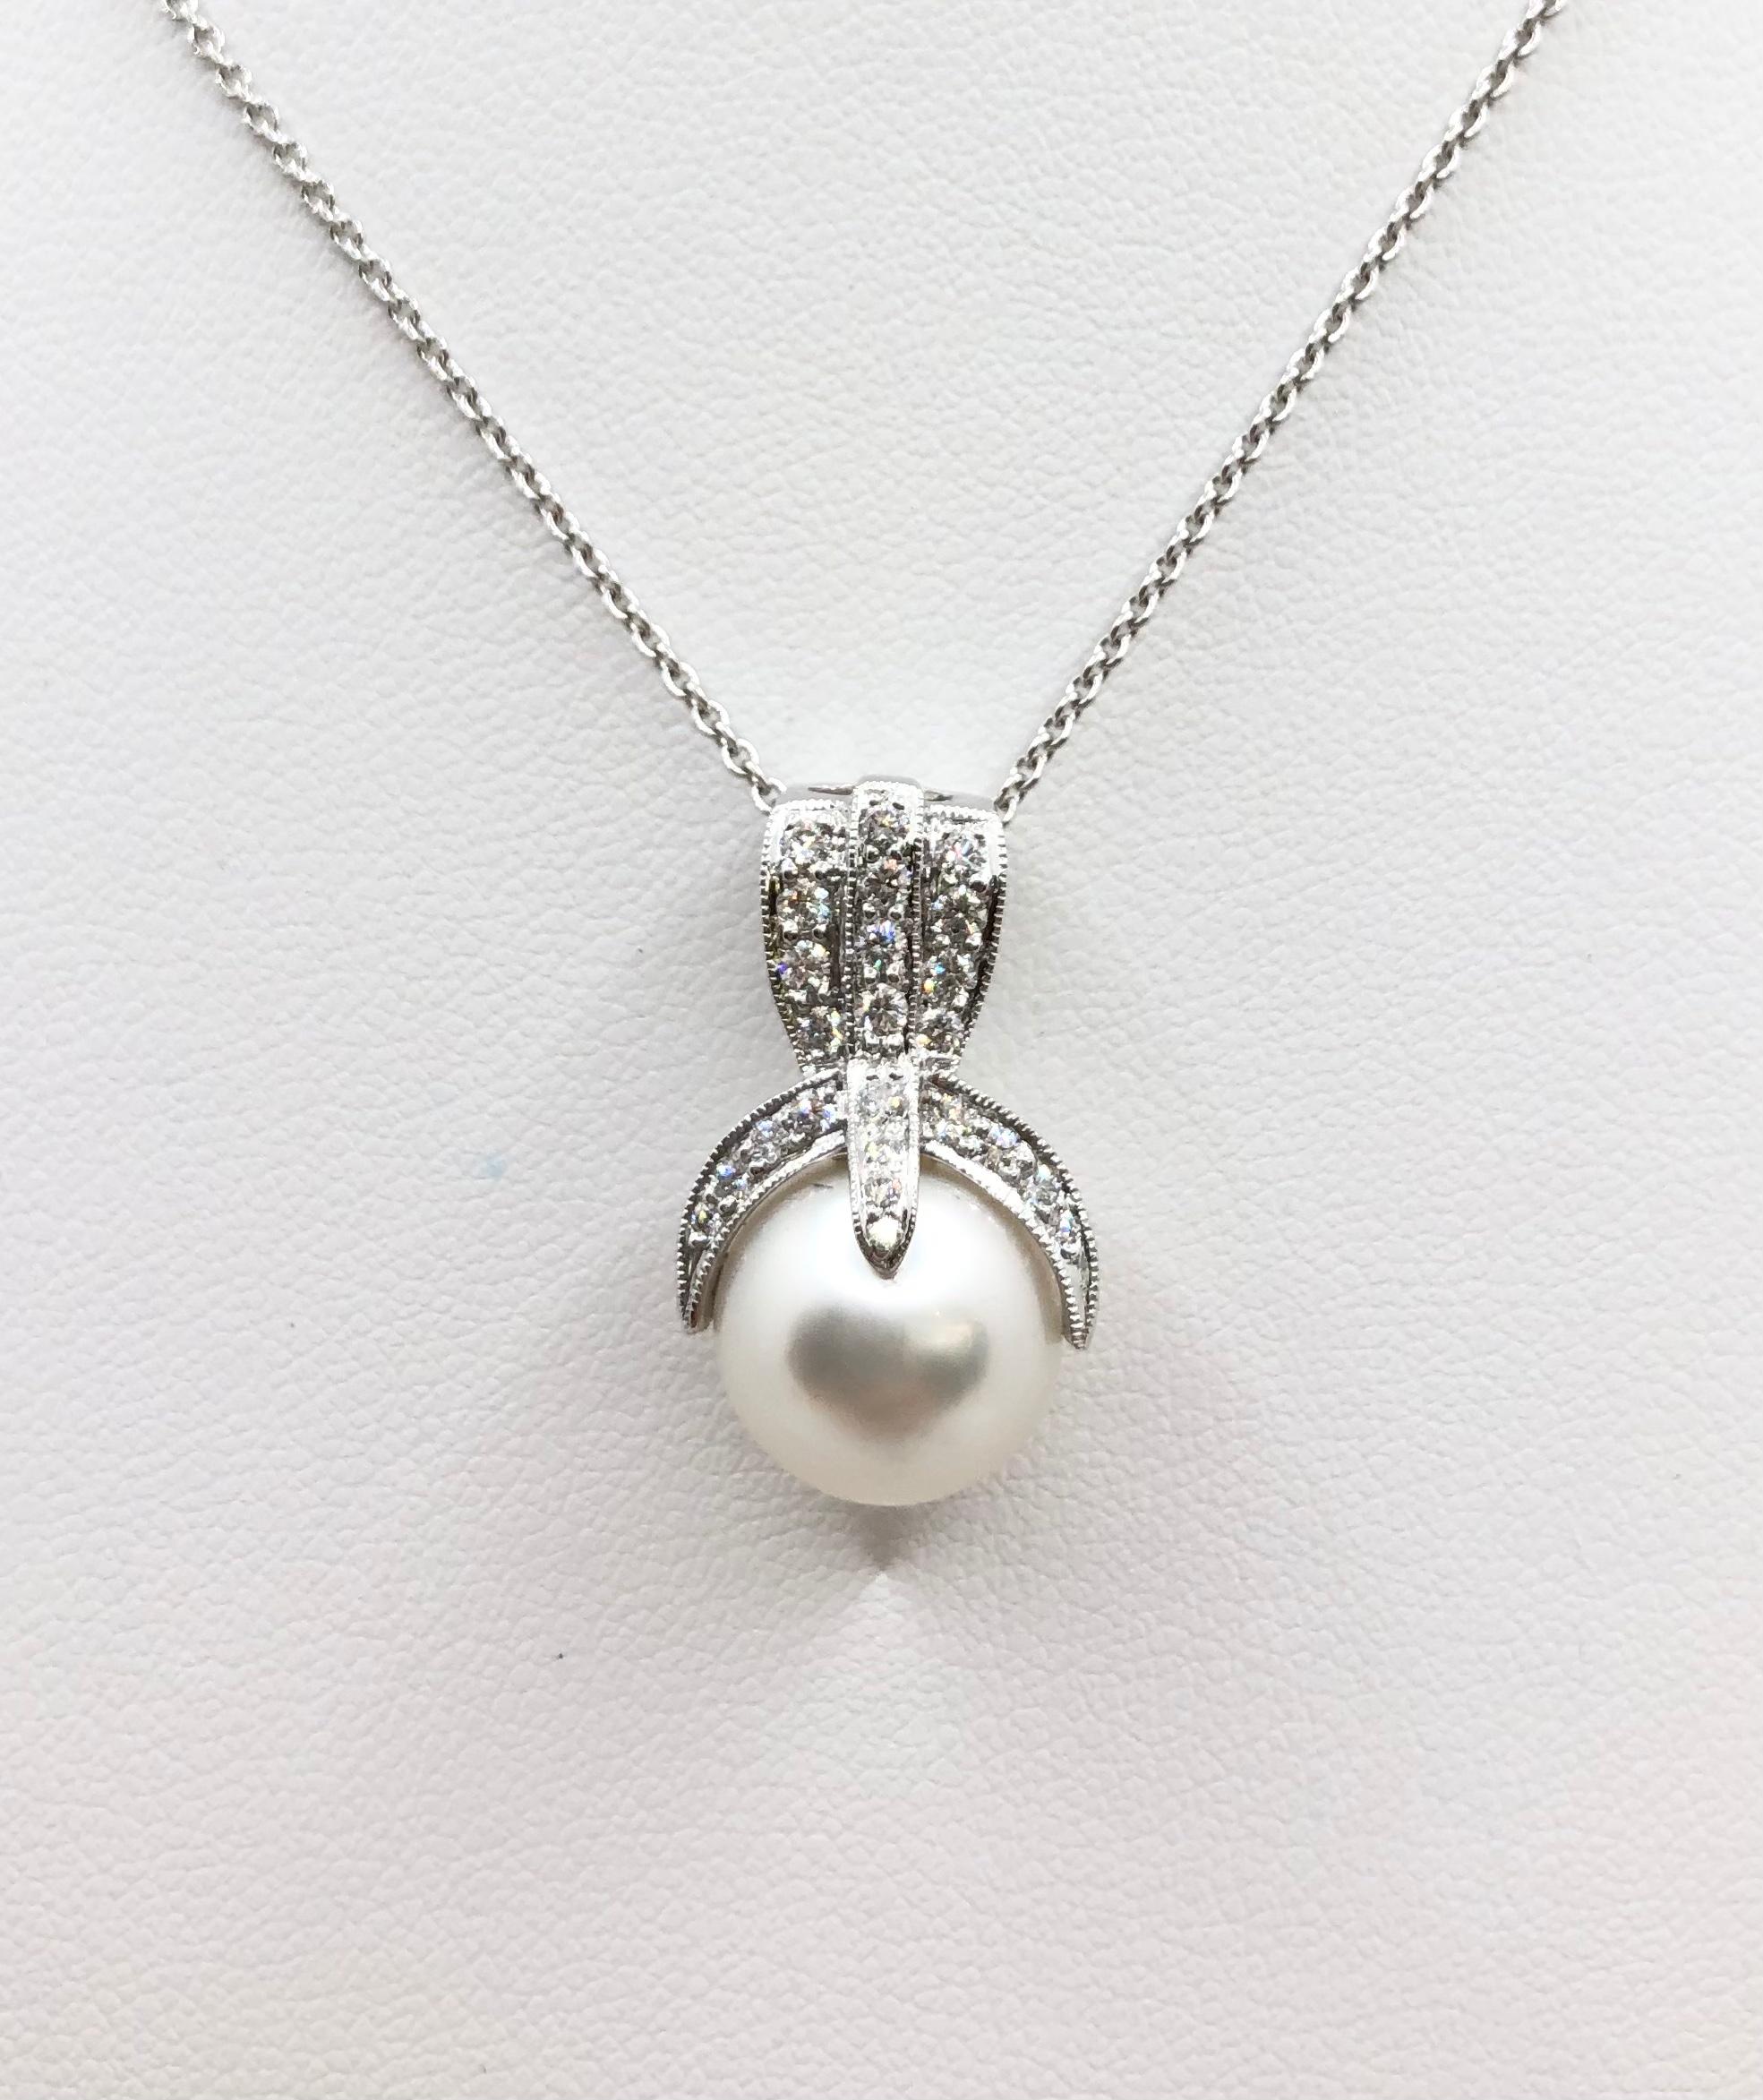 South Sea Pearl with Diamond 0.37 carat Pendant set in 18 Karat White Gold Settings
(chain not included)

Width: 1.4 cm 
Length: 2.4 cm
Total Weight: 4.81 grams
South Sea Pearl : 11.5 mm

